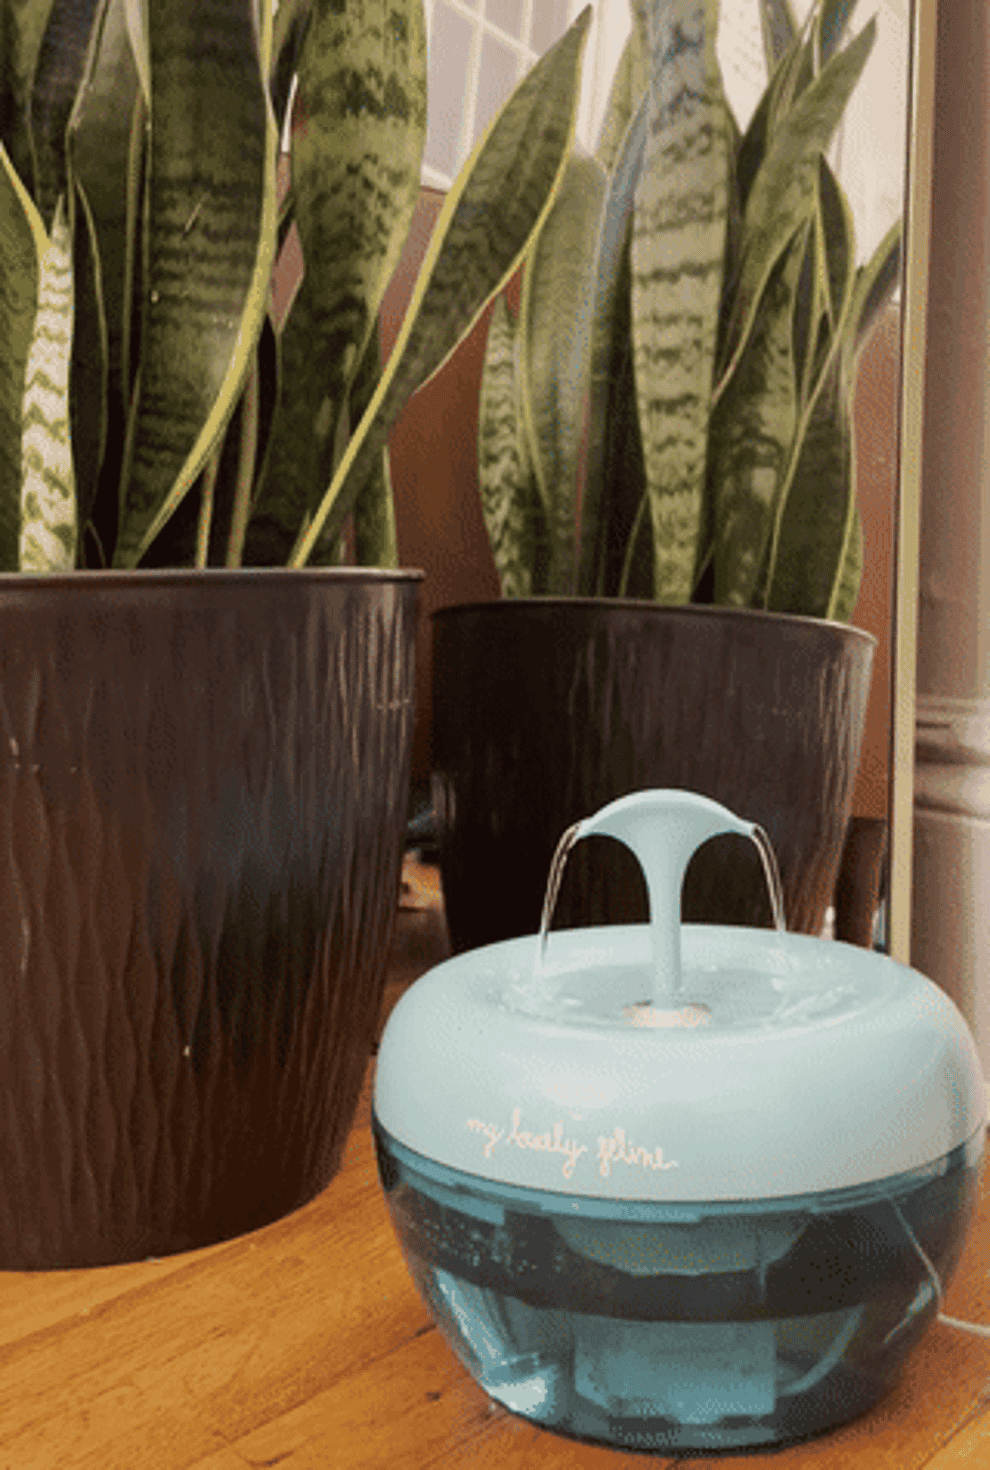 gif of the two-spout fountain in use beside a plant